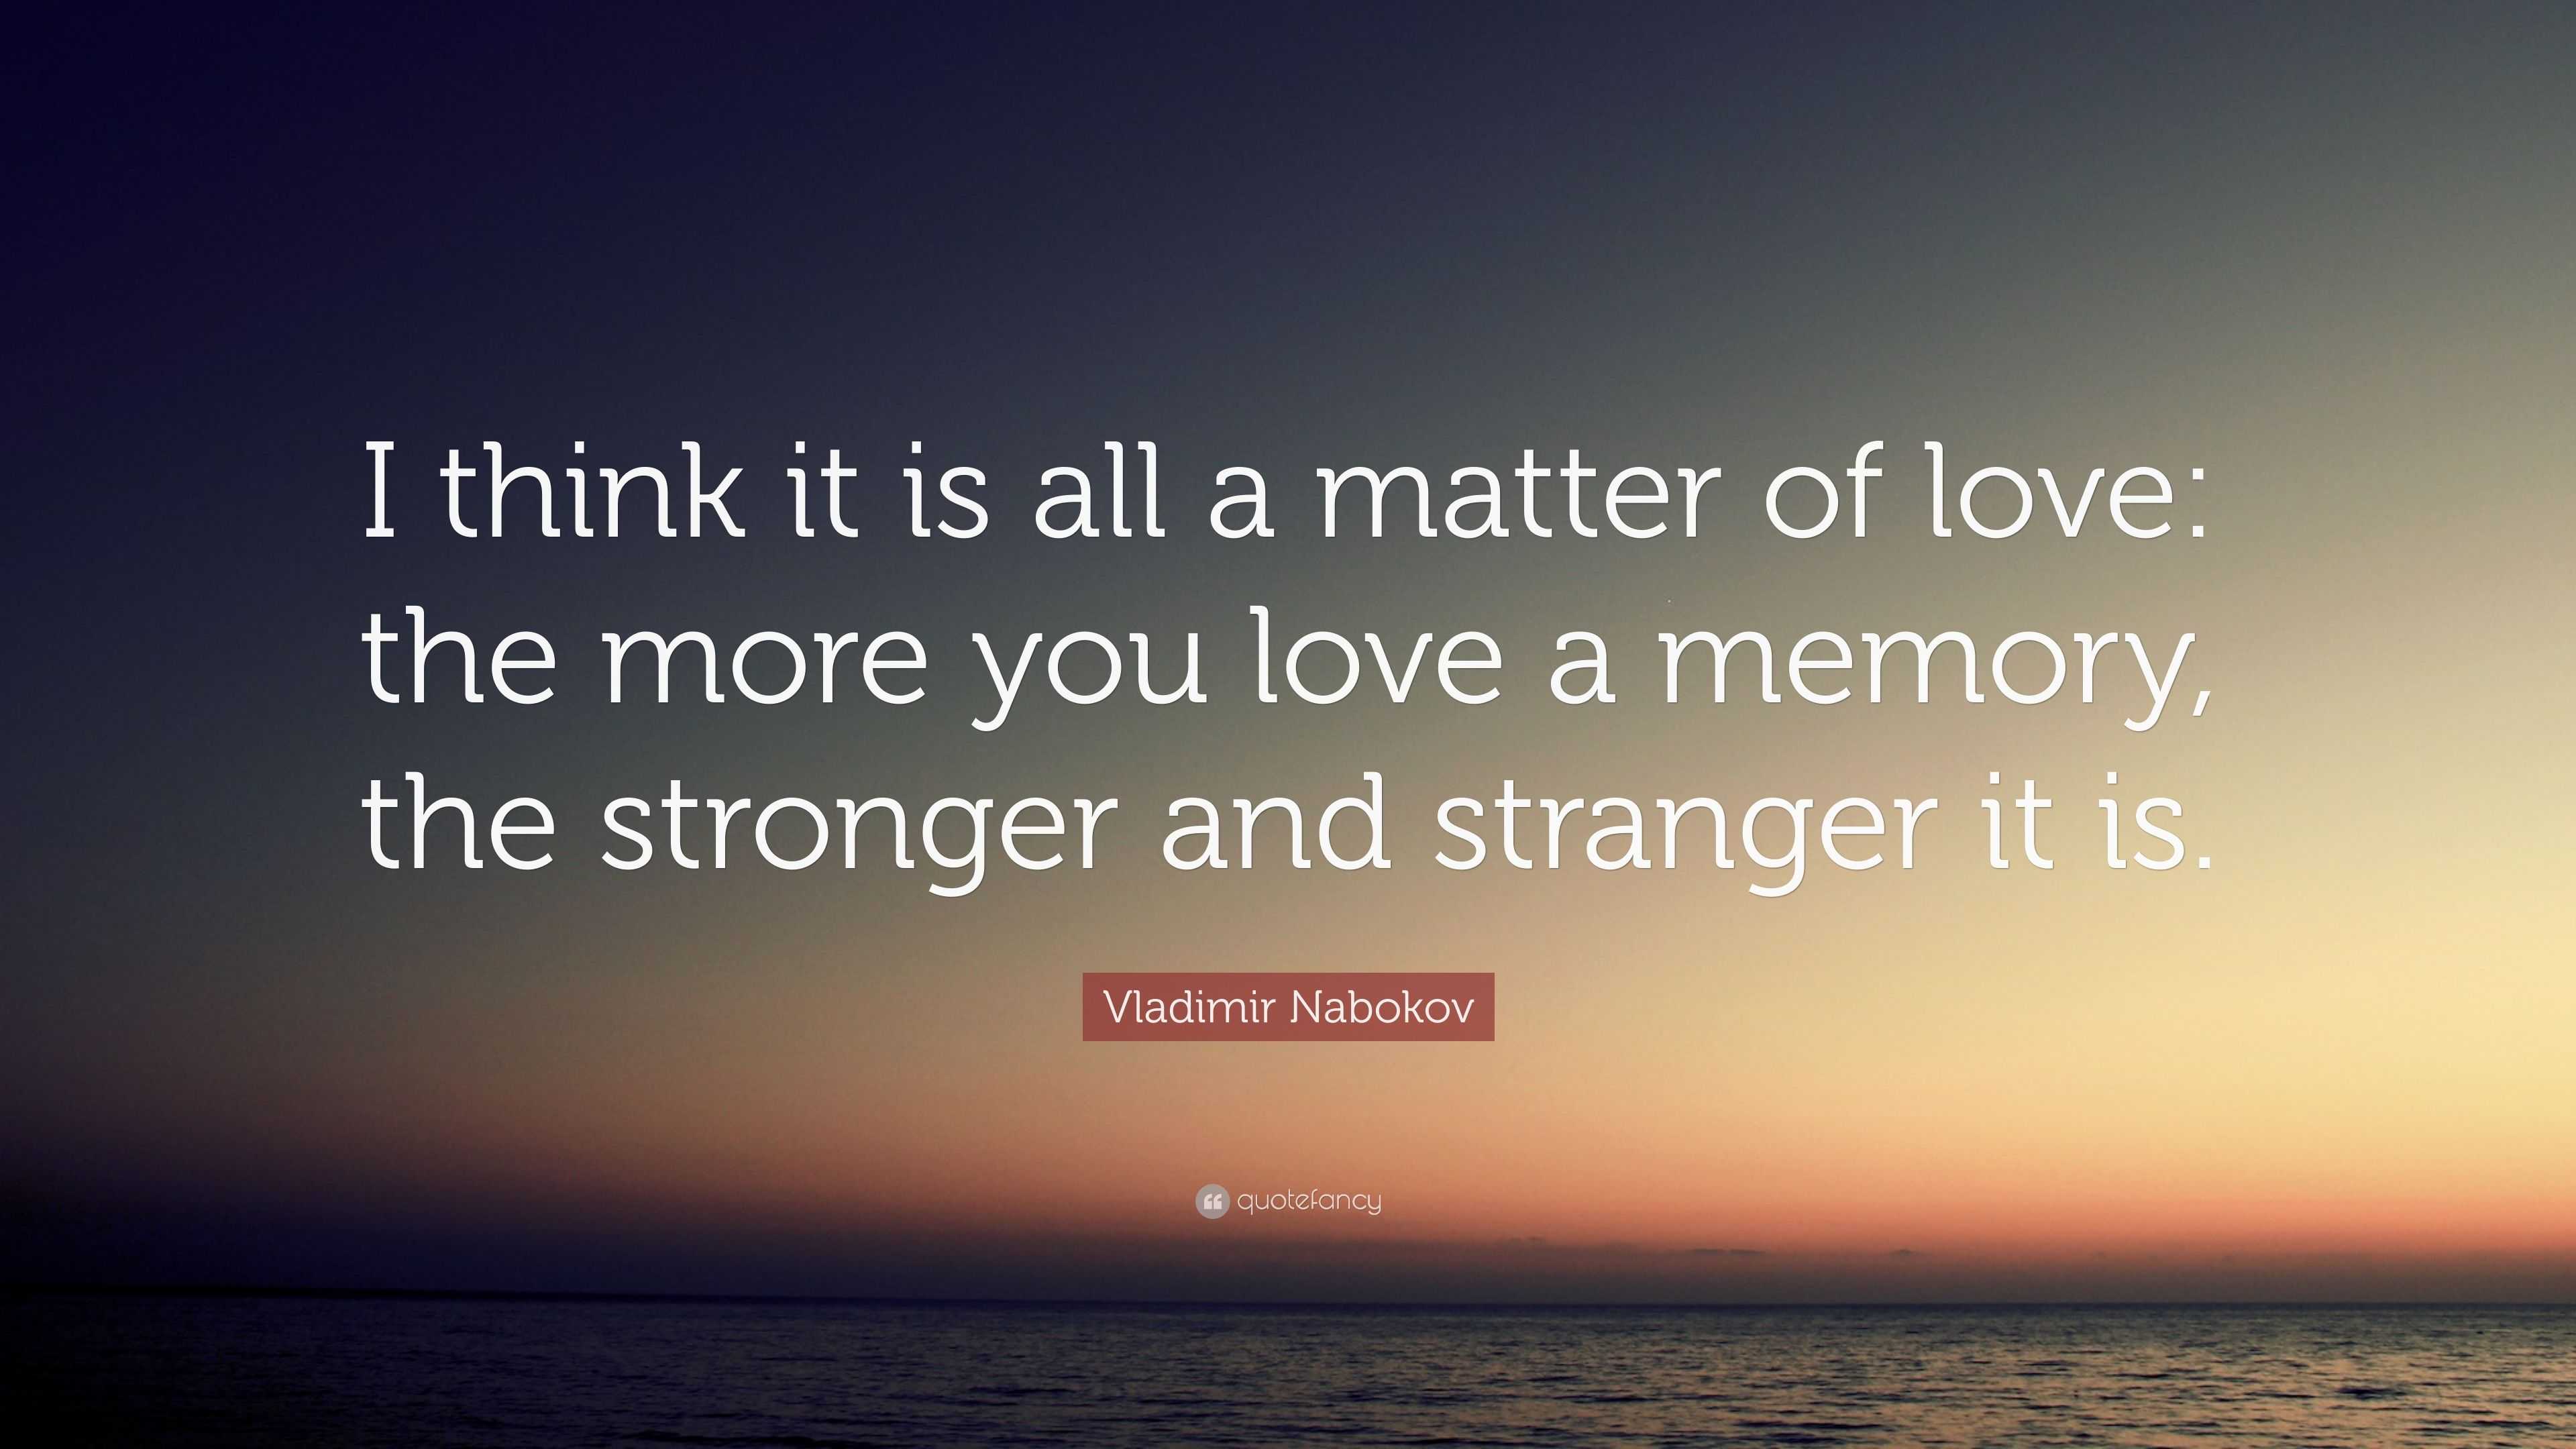 Vladimir Nabokov Quote “i Think It Is All A Matter Of Love The More